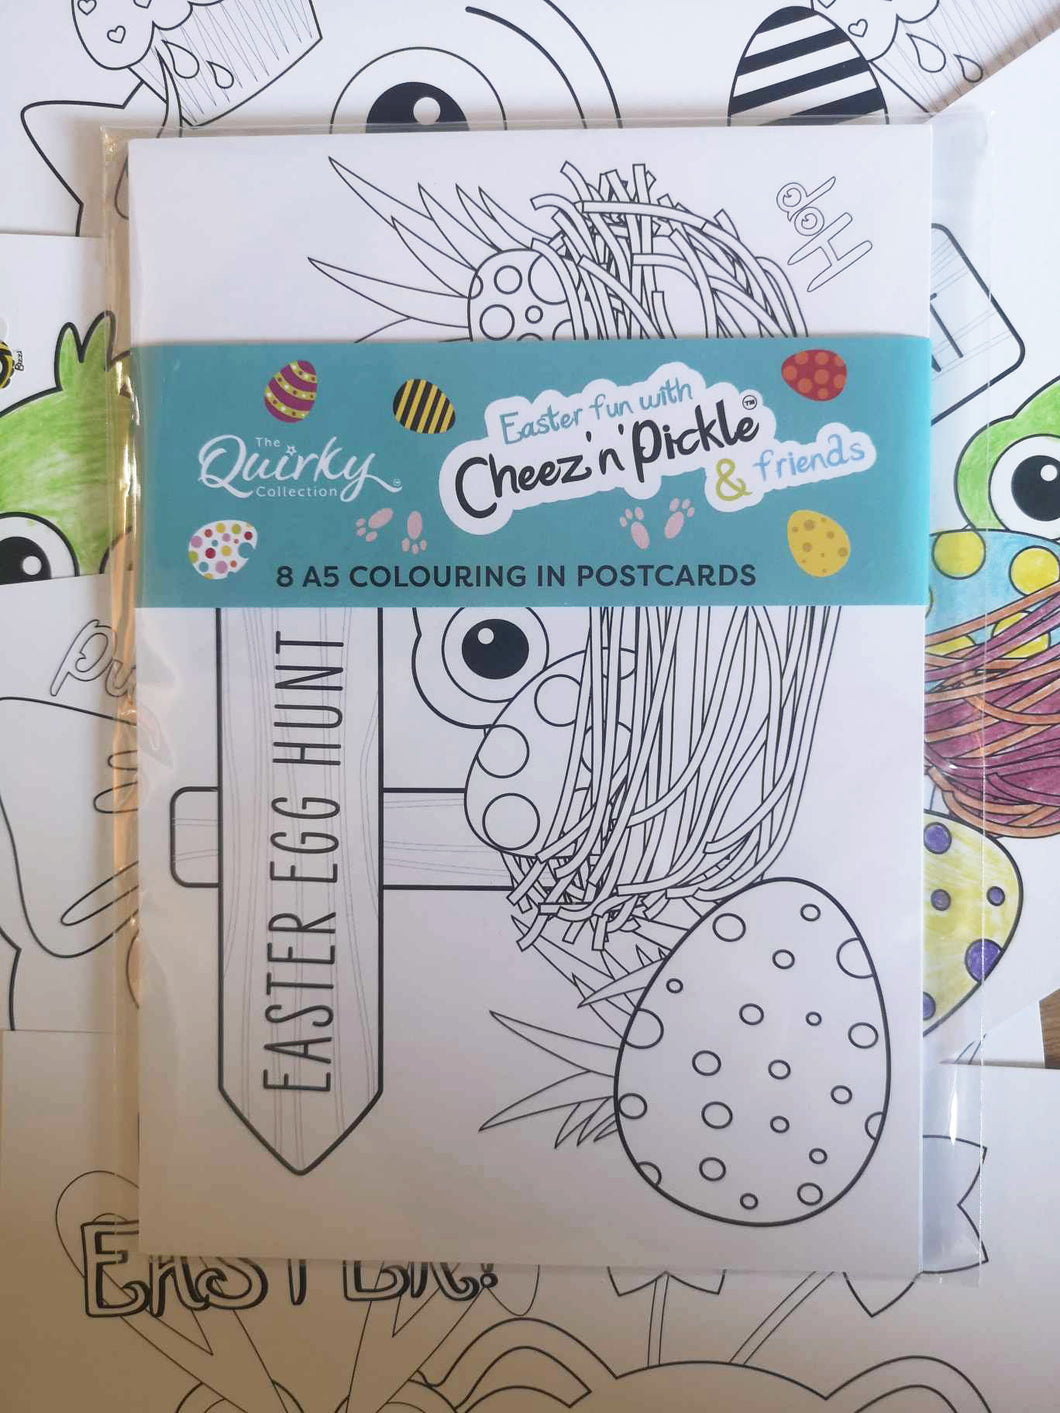 Easter fun with Cheez 'n' Pickle & friends Set of 8 A5 Colouring in Postcards with Pencils